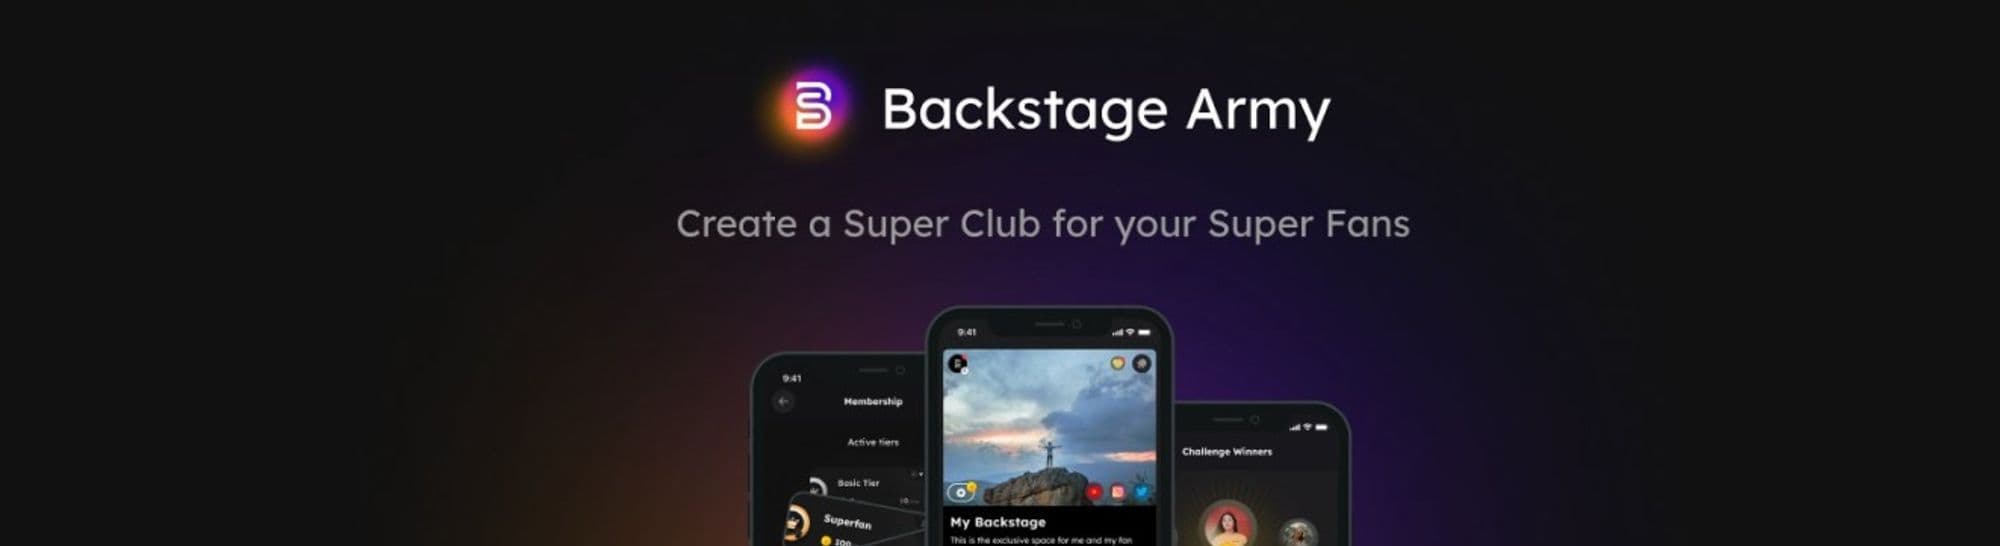 Backstage Army Cover Image